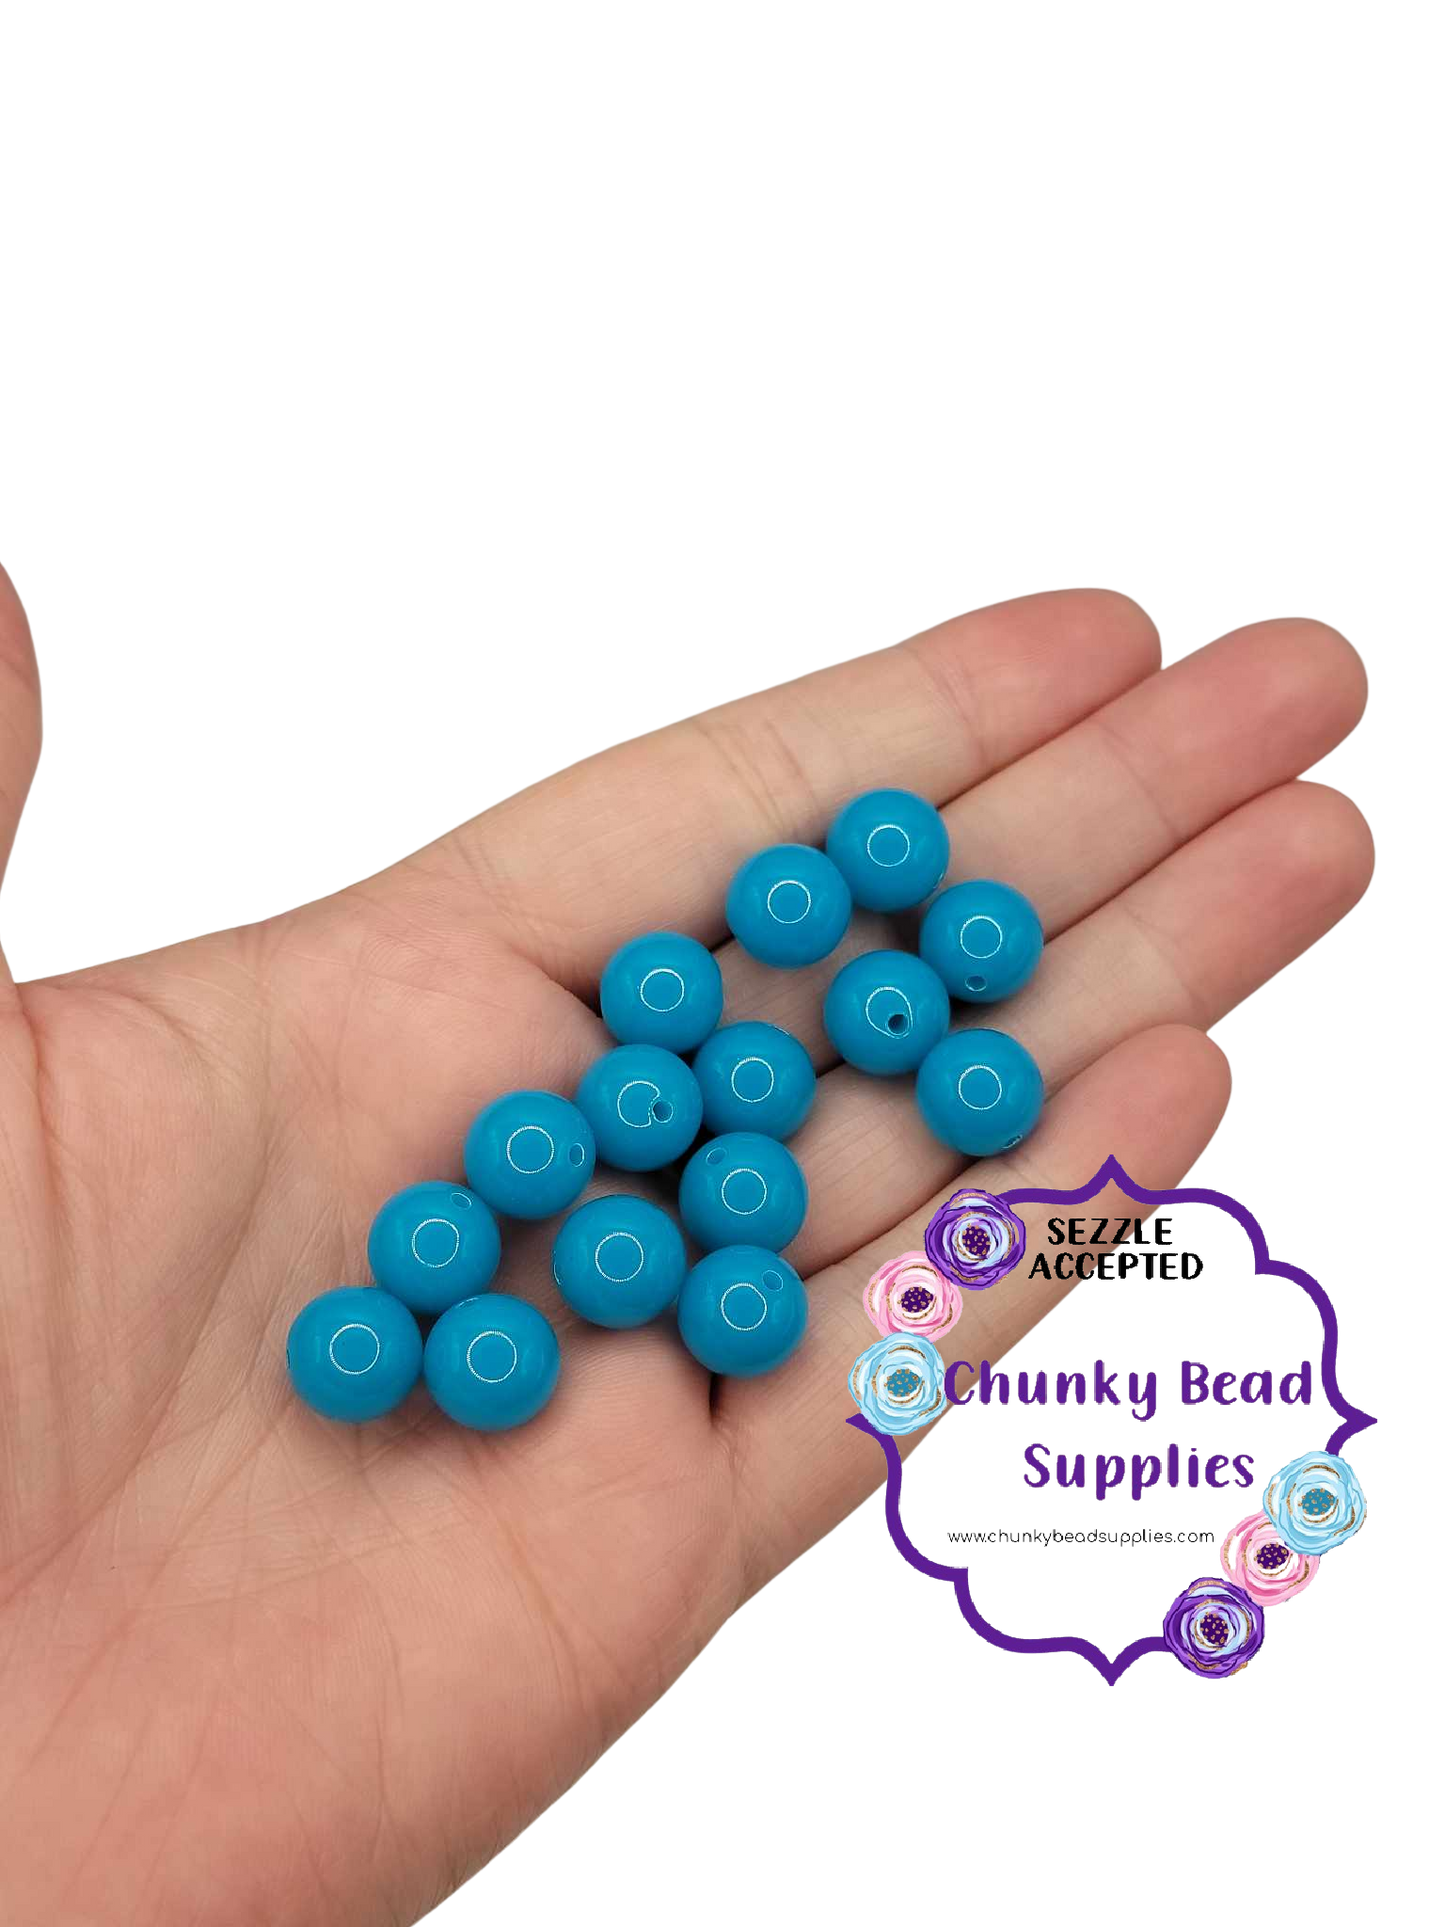 12mm "Blue" Neon Solid Chunky Bubblegum Beads